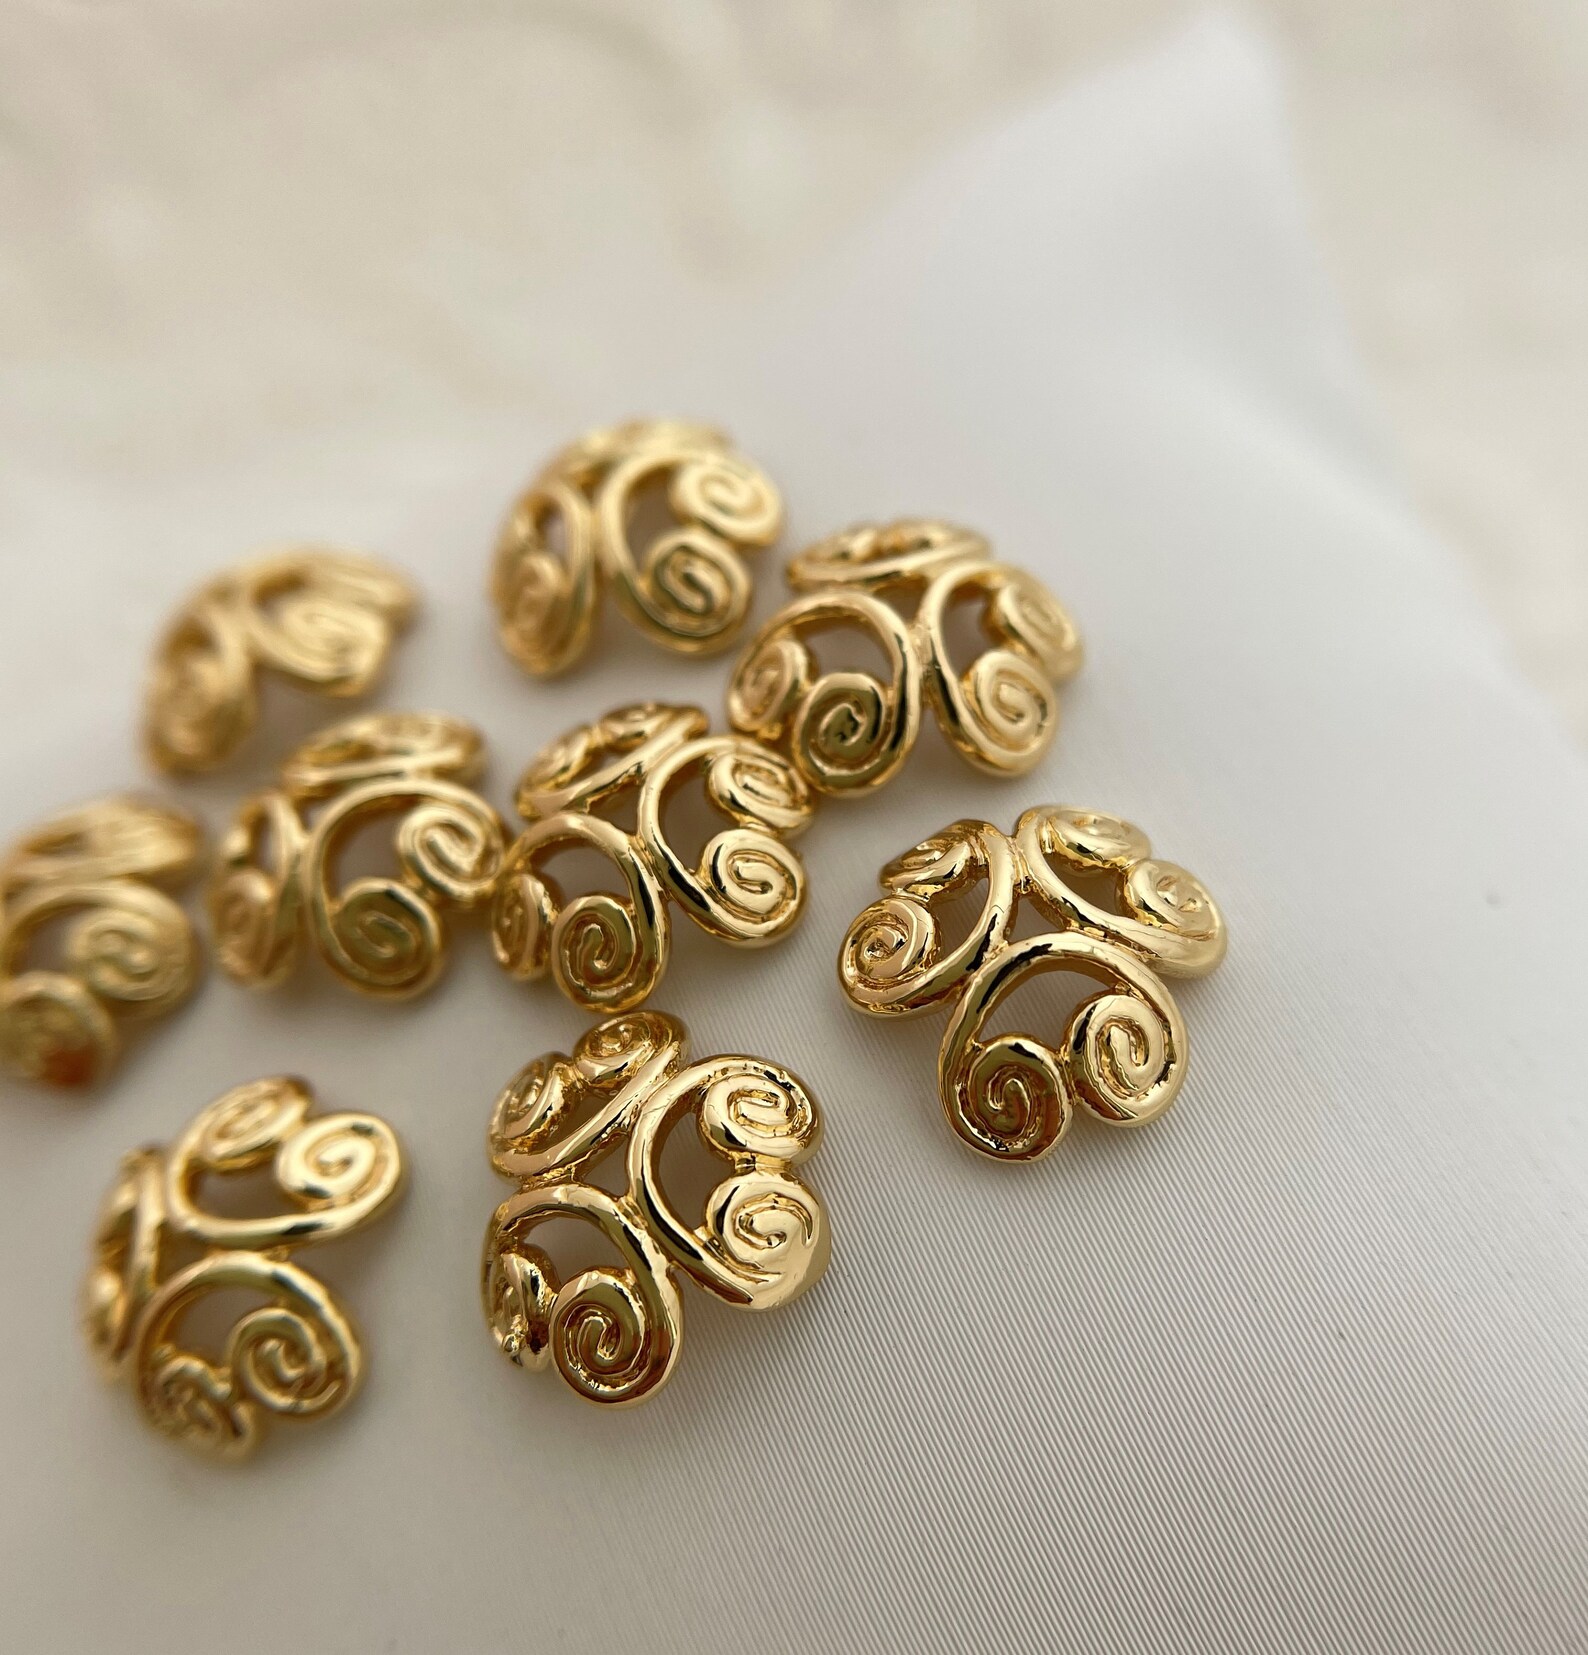 10 Pieces of 14K Gold Filled Bead Cap 6mm/8mm/10mm - Etsy